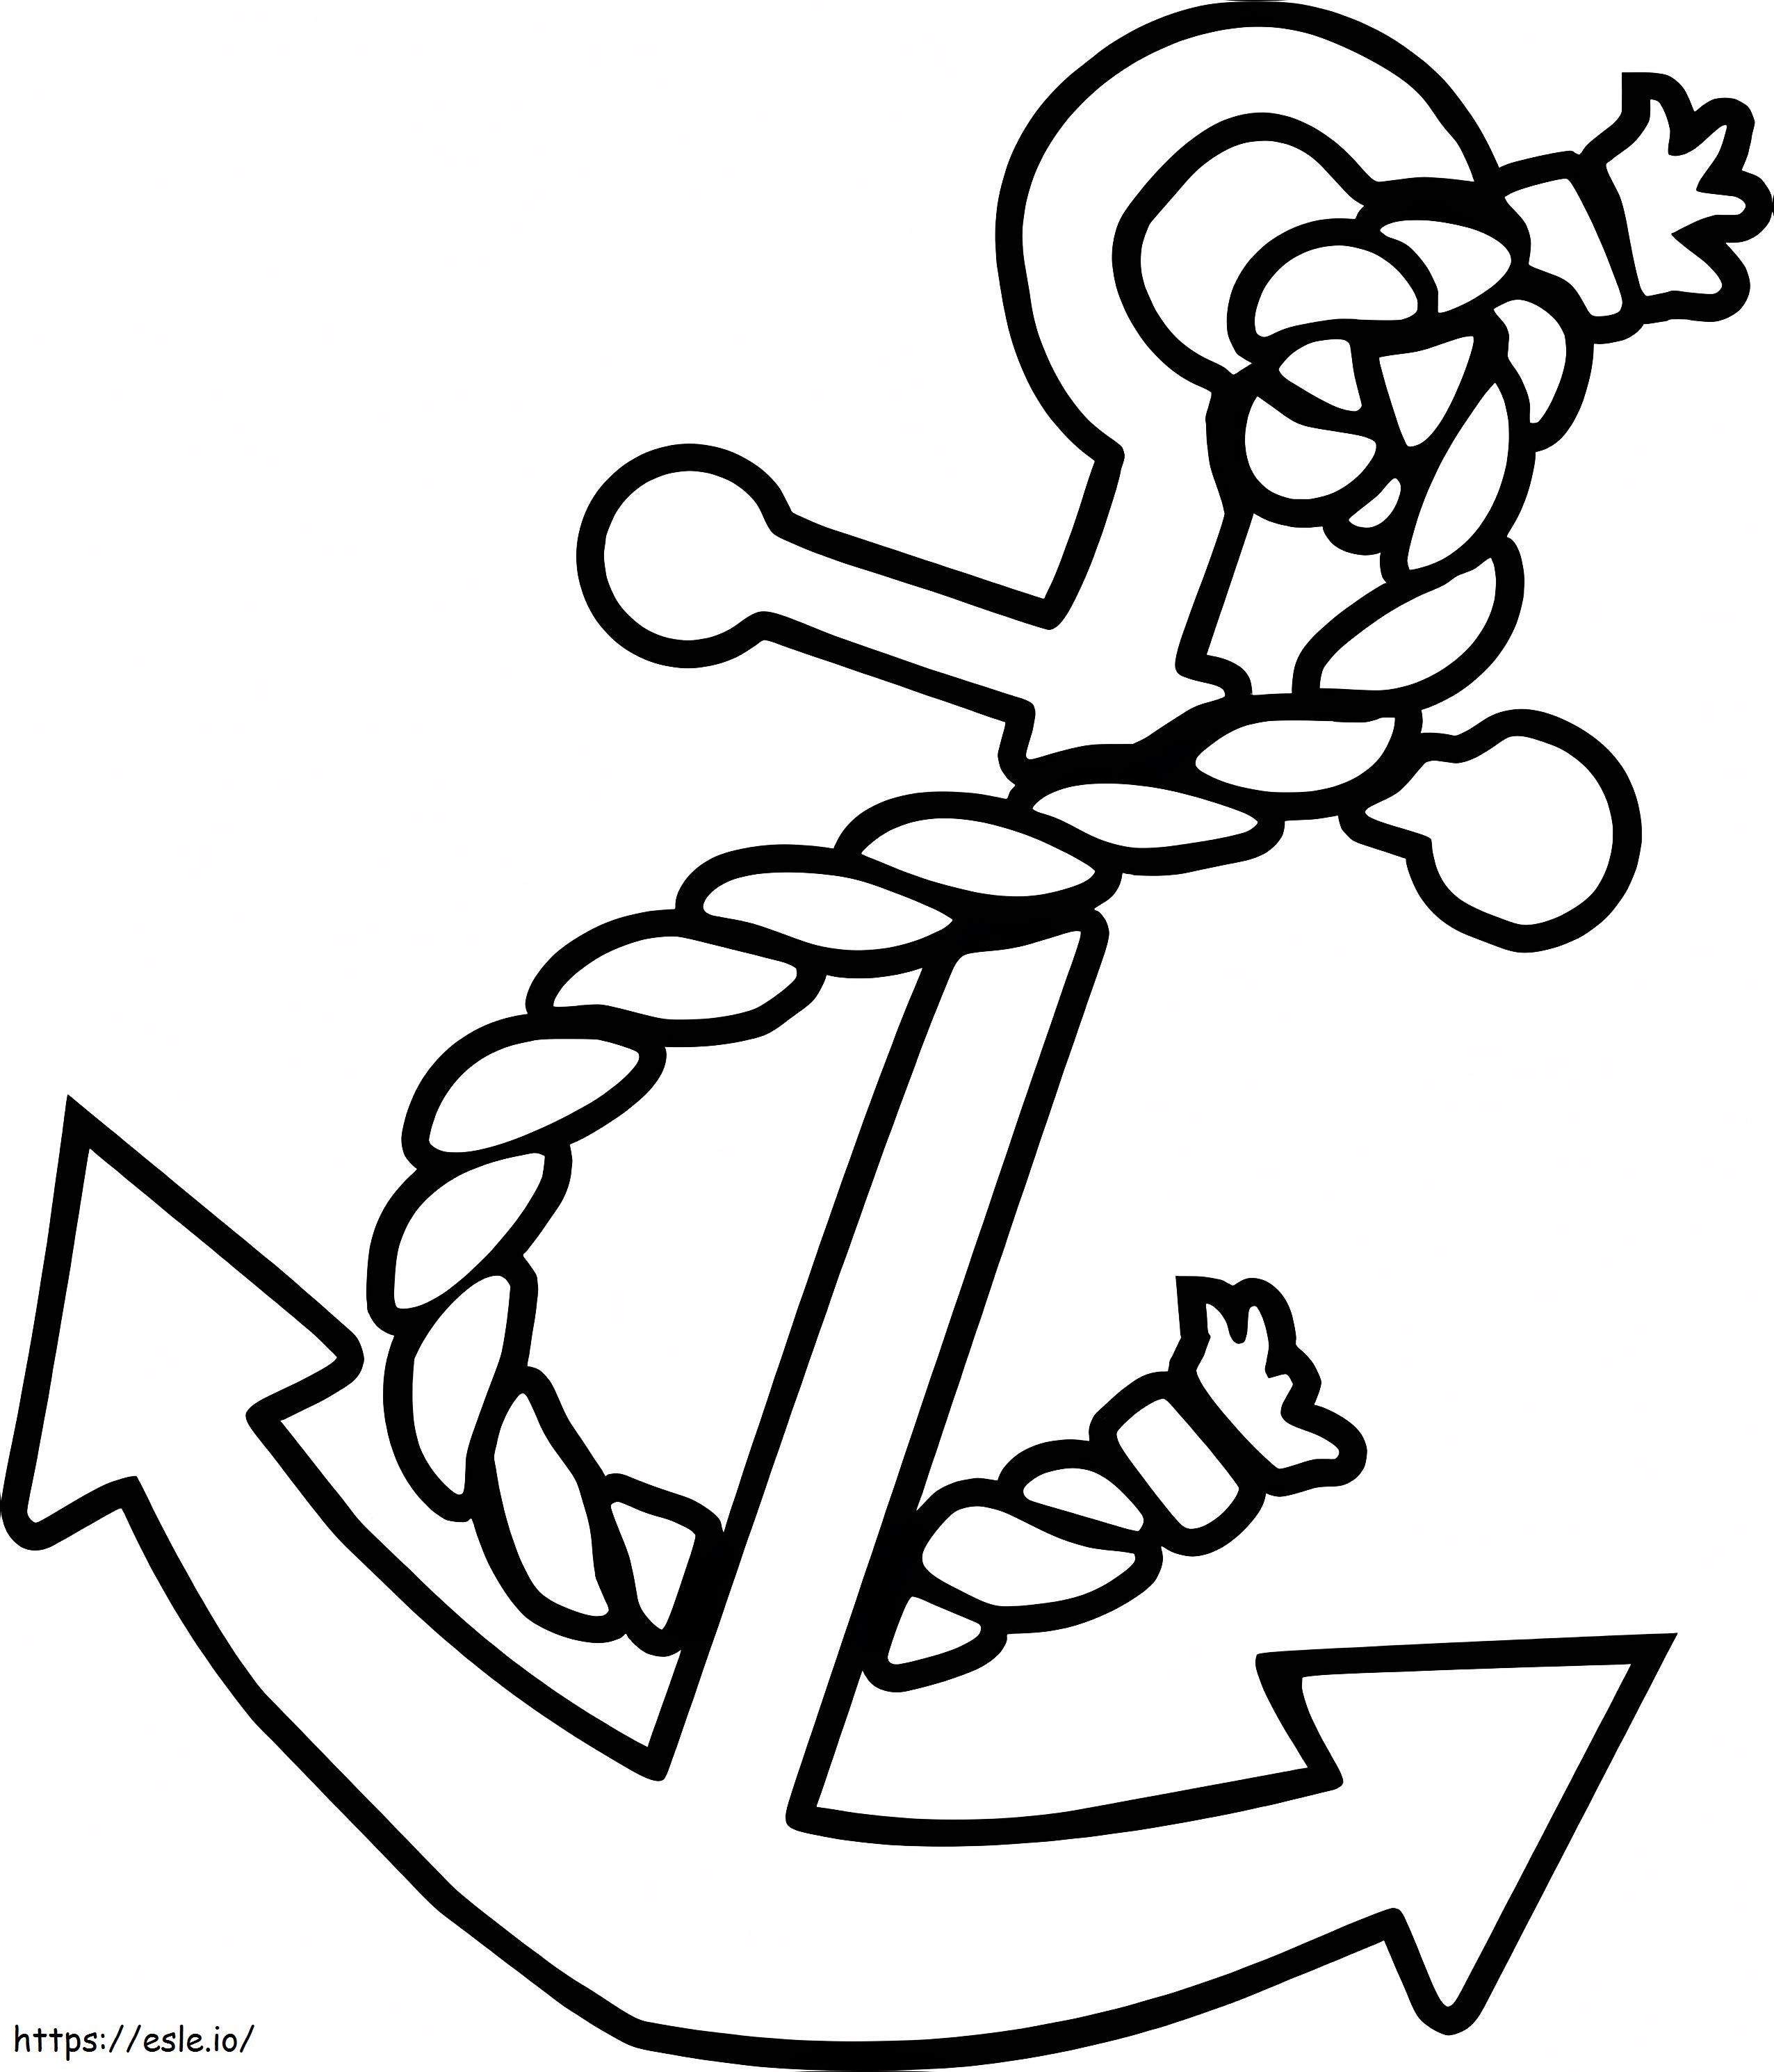 Basic Anchor coloring page